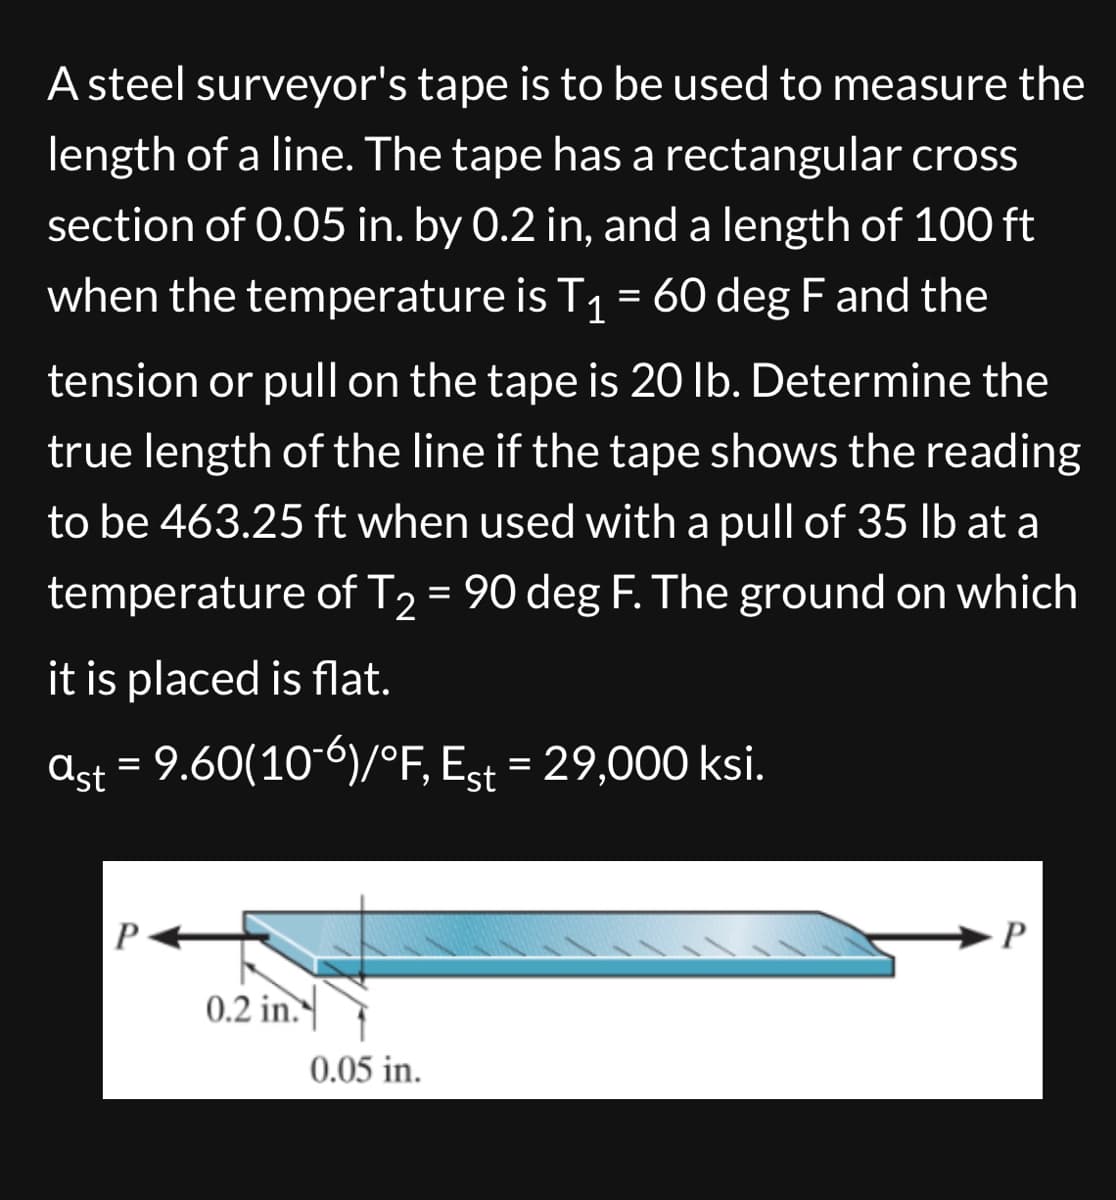 A steel surveyor's tape is to be used to measure the
length of a line. The tape has a rectangular cross
section of 0.05 in. by 0.2 in, and a length of 100 ft
when the temperature is T₁ = 60 deg F and the
tension or pull on the tape is 20 lb. Determine the
true length of the line if the tape shows the reading
to be 463.25 ft when used with a pull of 35 lb at a
temperature of T2 = 90 deg F. The ground on which
it is placed is flat.
ast = 9.60(10-6)/°F, Est = 29,000 ksi.
P
0.2 in.
0.05 in.
P